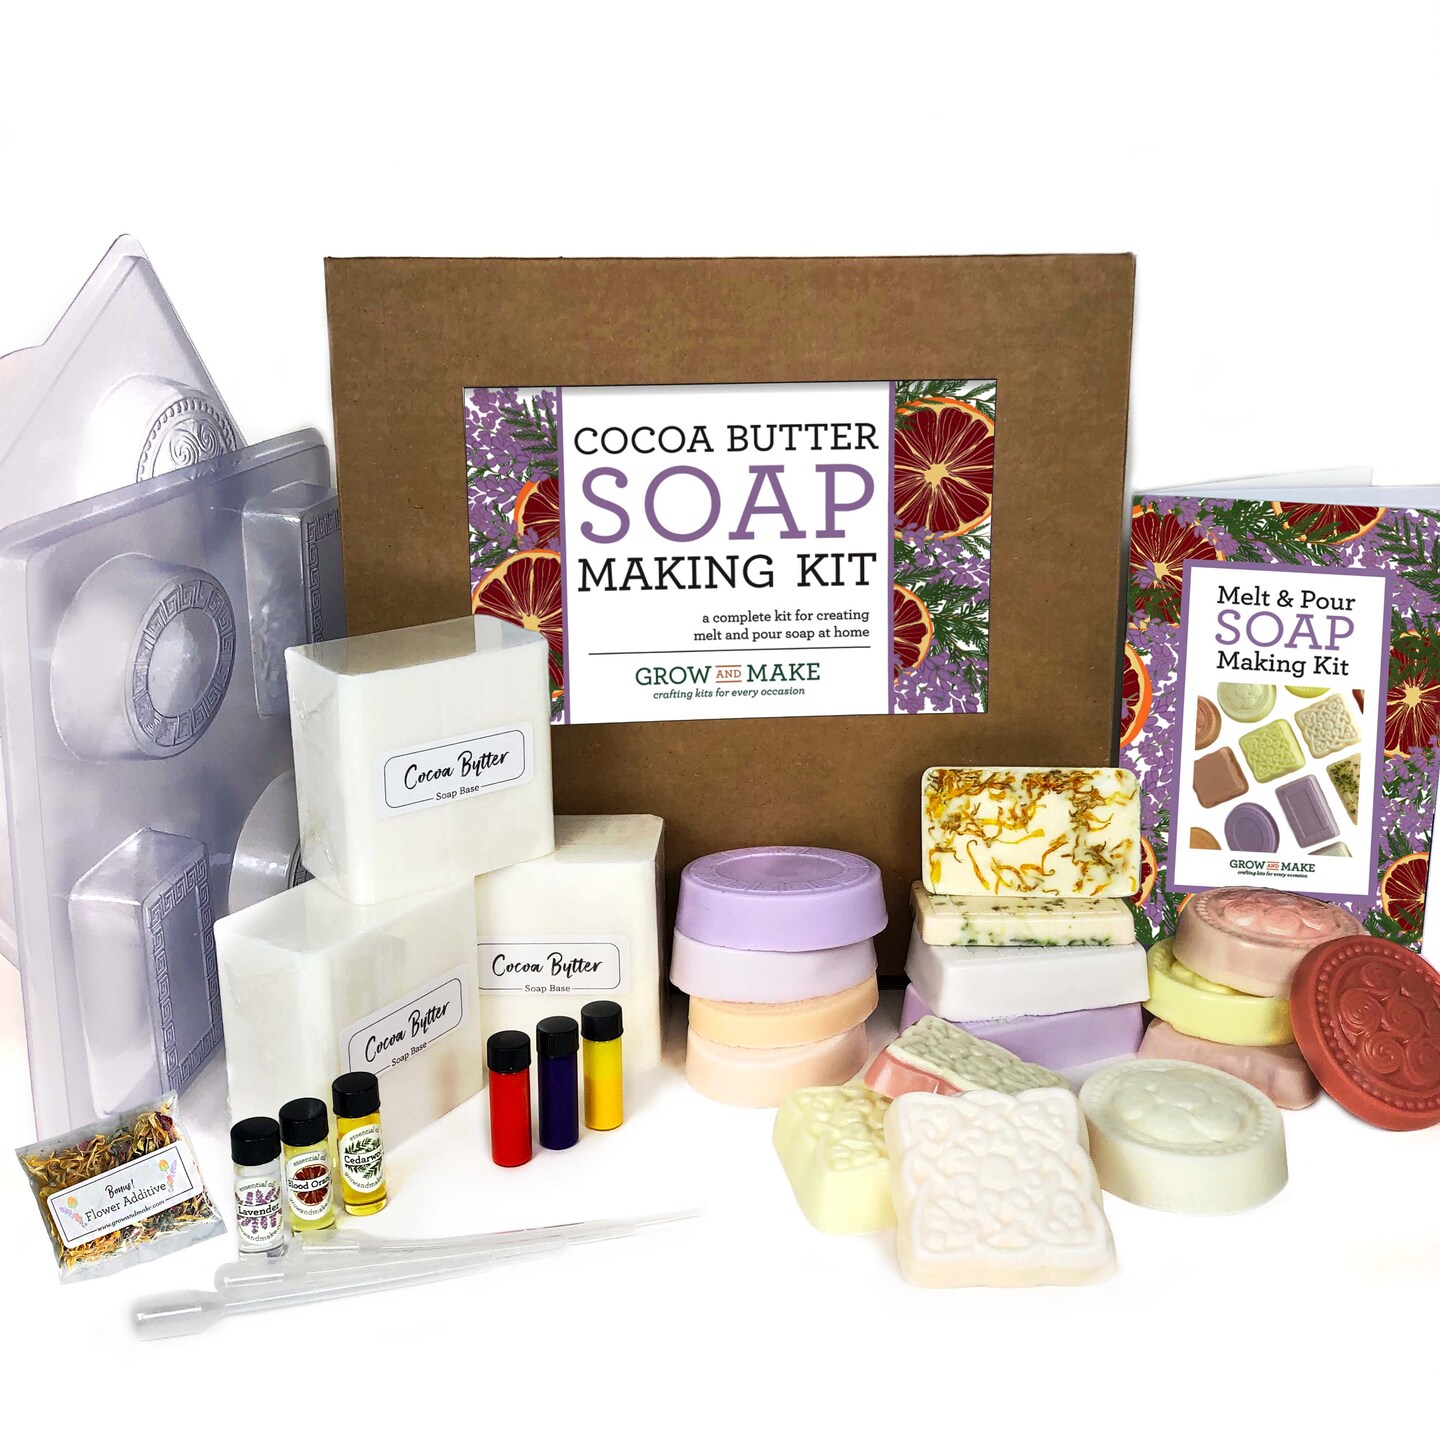 Soap Making DIY Kit - Luxurious Cocoa Butter Bars with dried flowers and  soap dyes